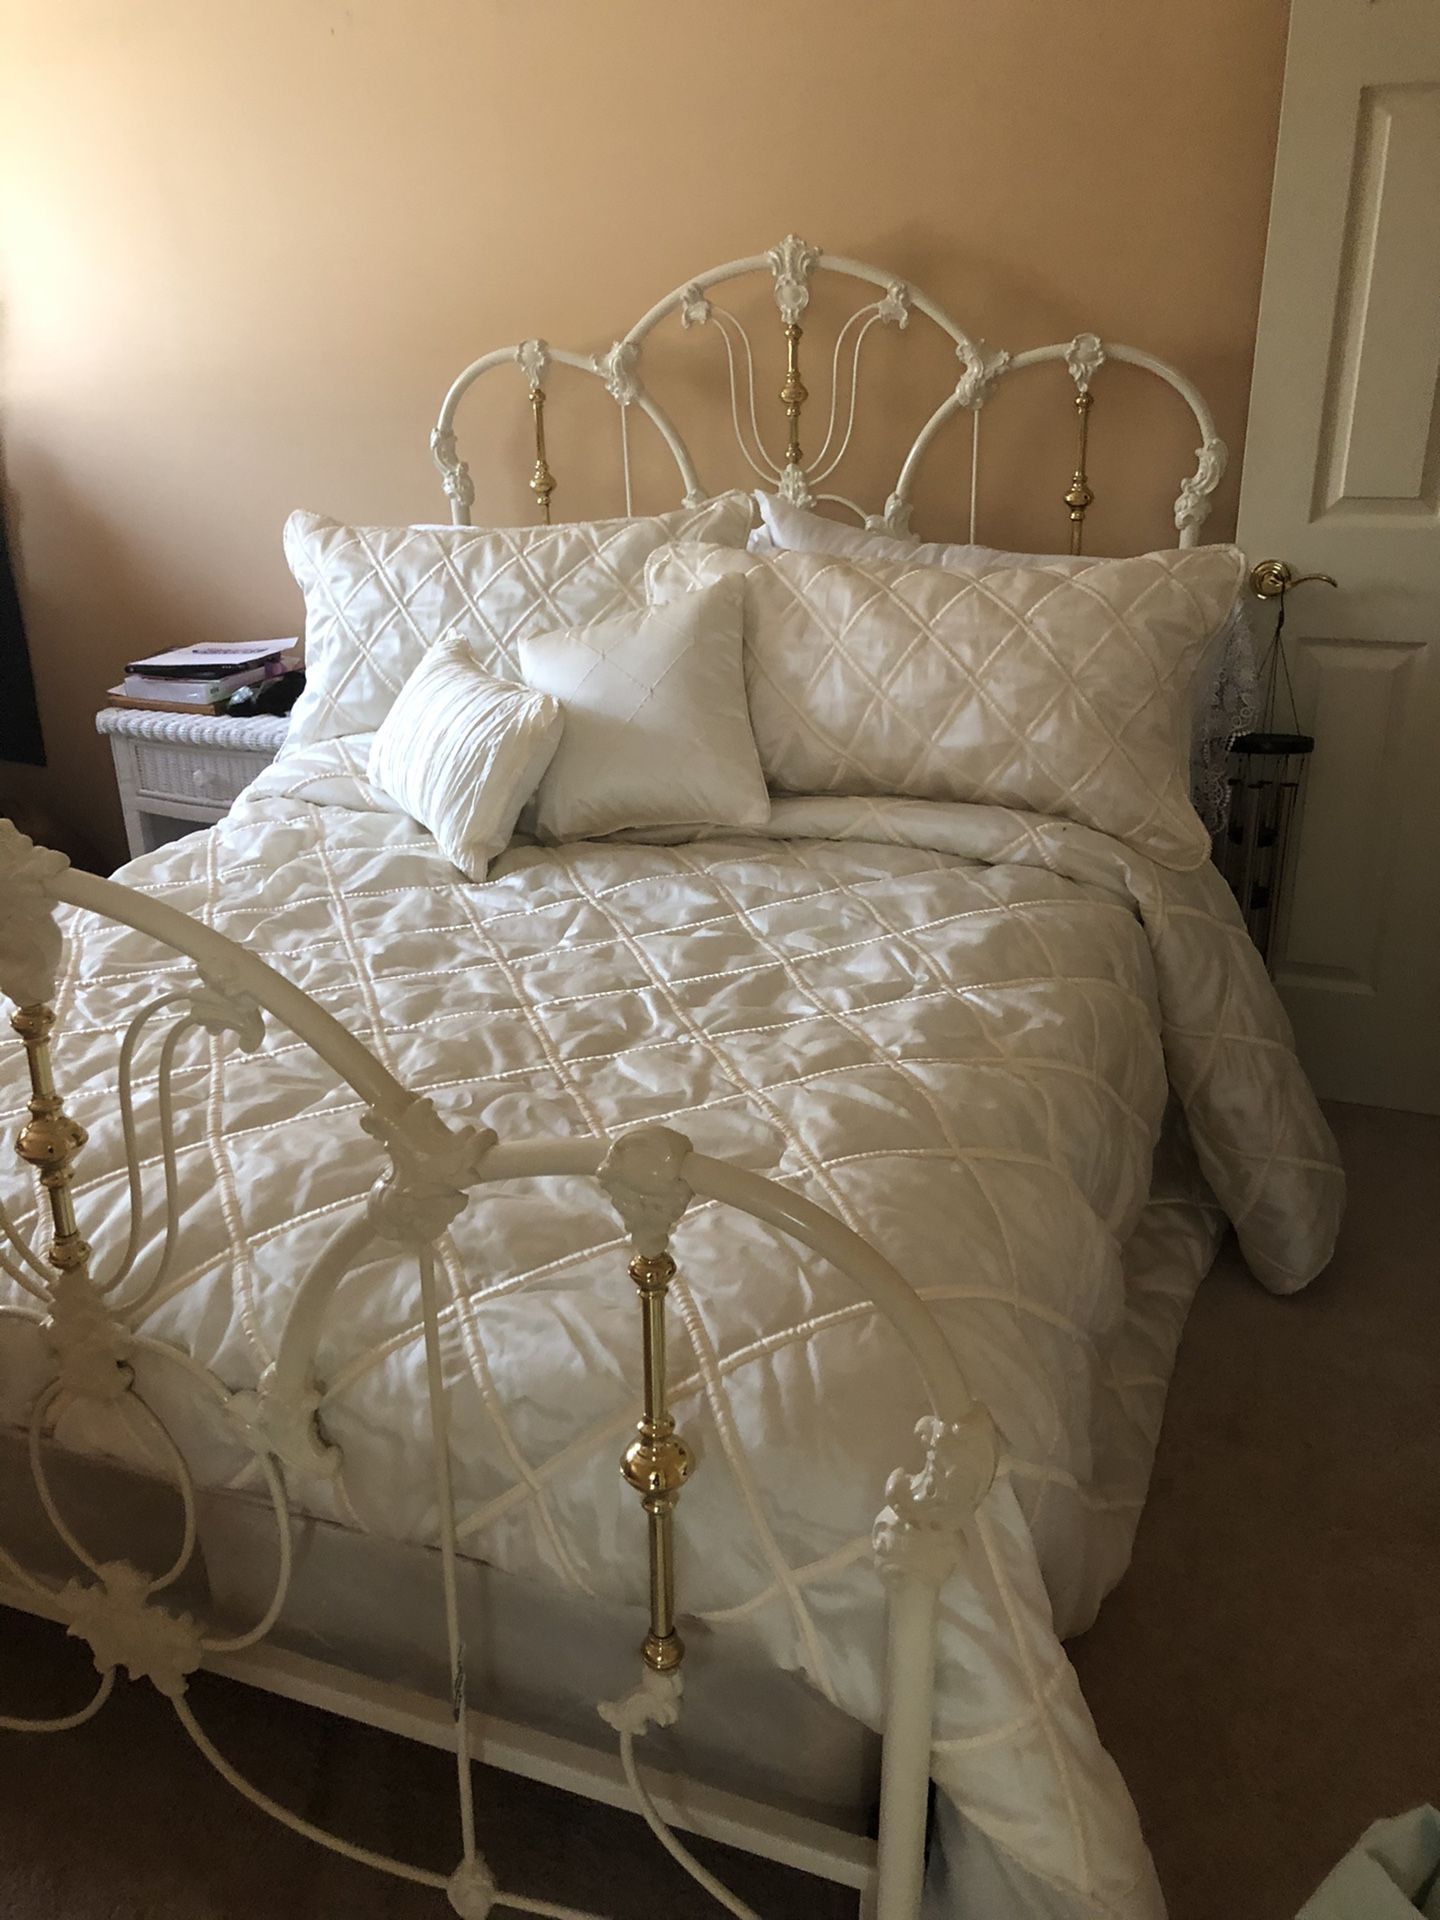 Girls bedroom set. Brass double bed. Box spring and mattress